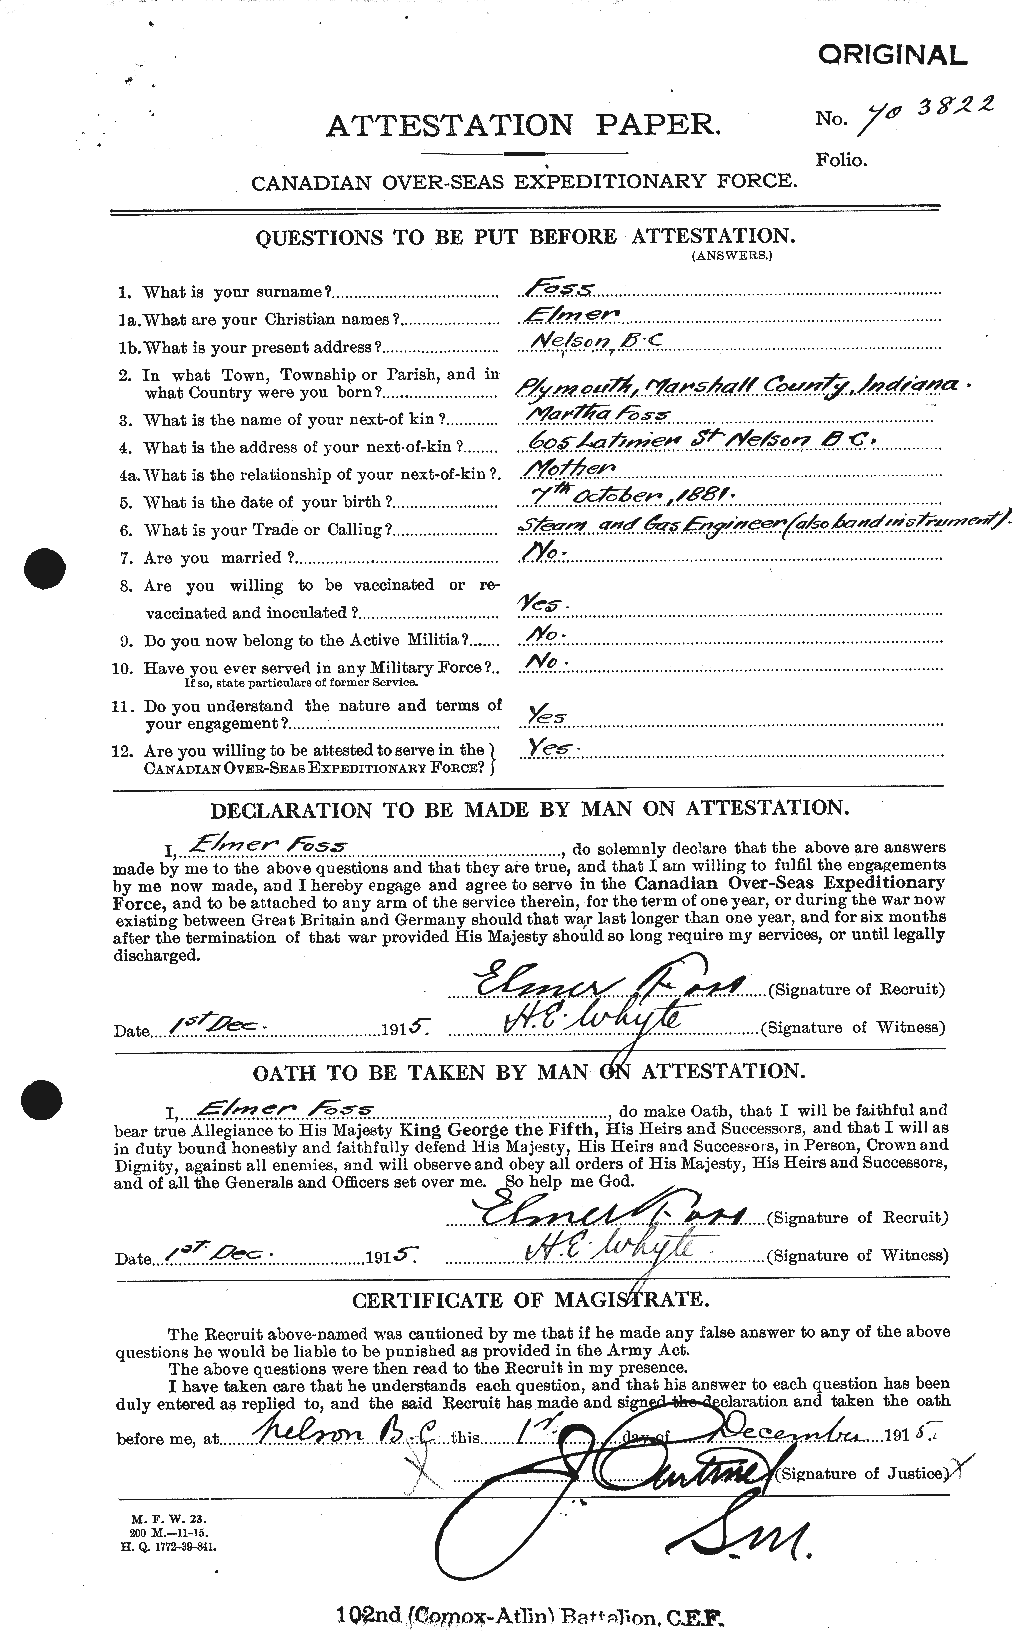 Personnel Records of the First World War - CEF 330388a